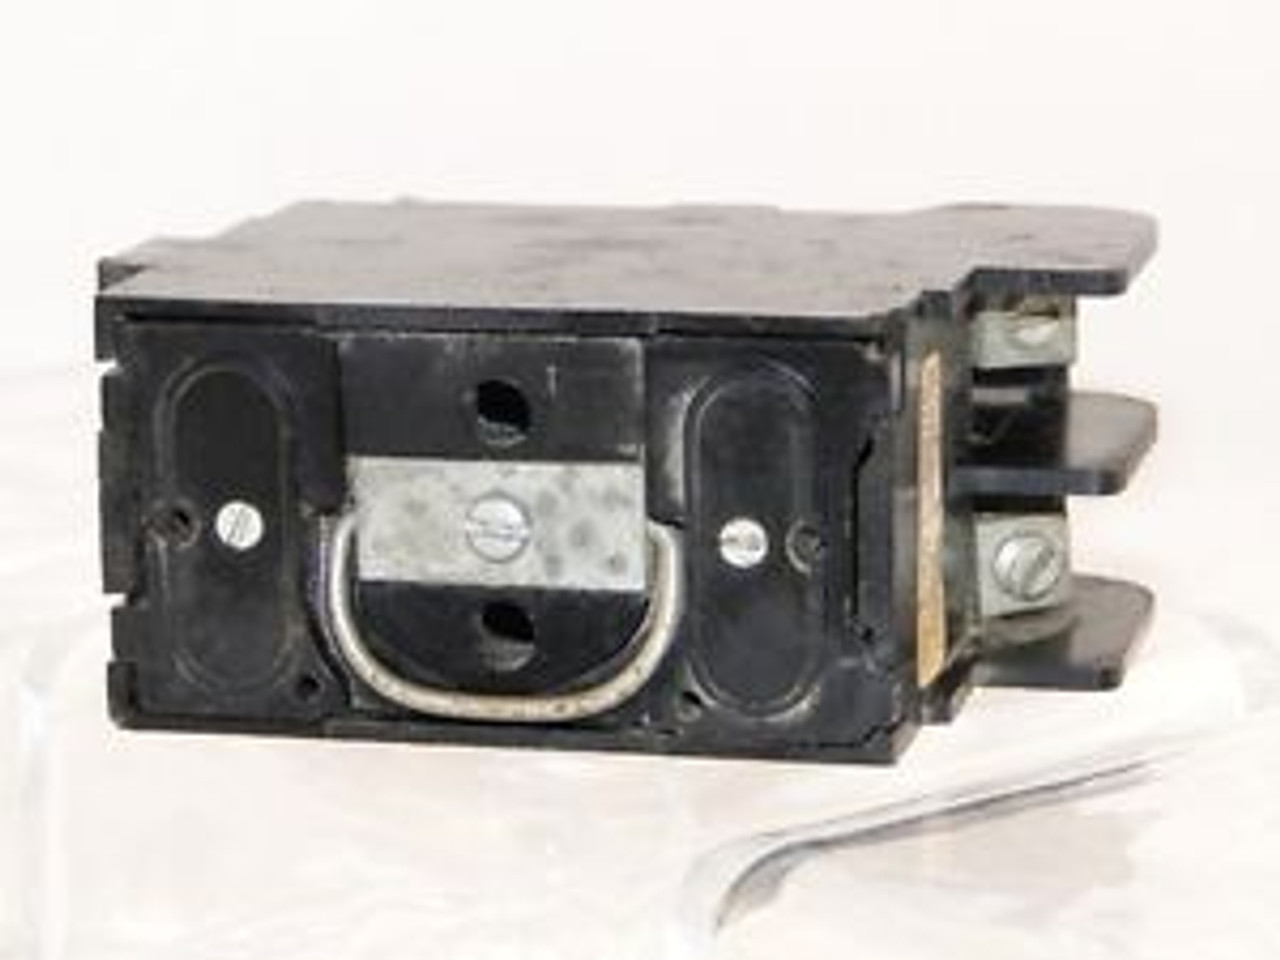 General Electric GE 60 Amp TRC 260 220V Fuse Base And Pull Out 